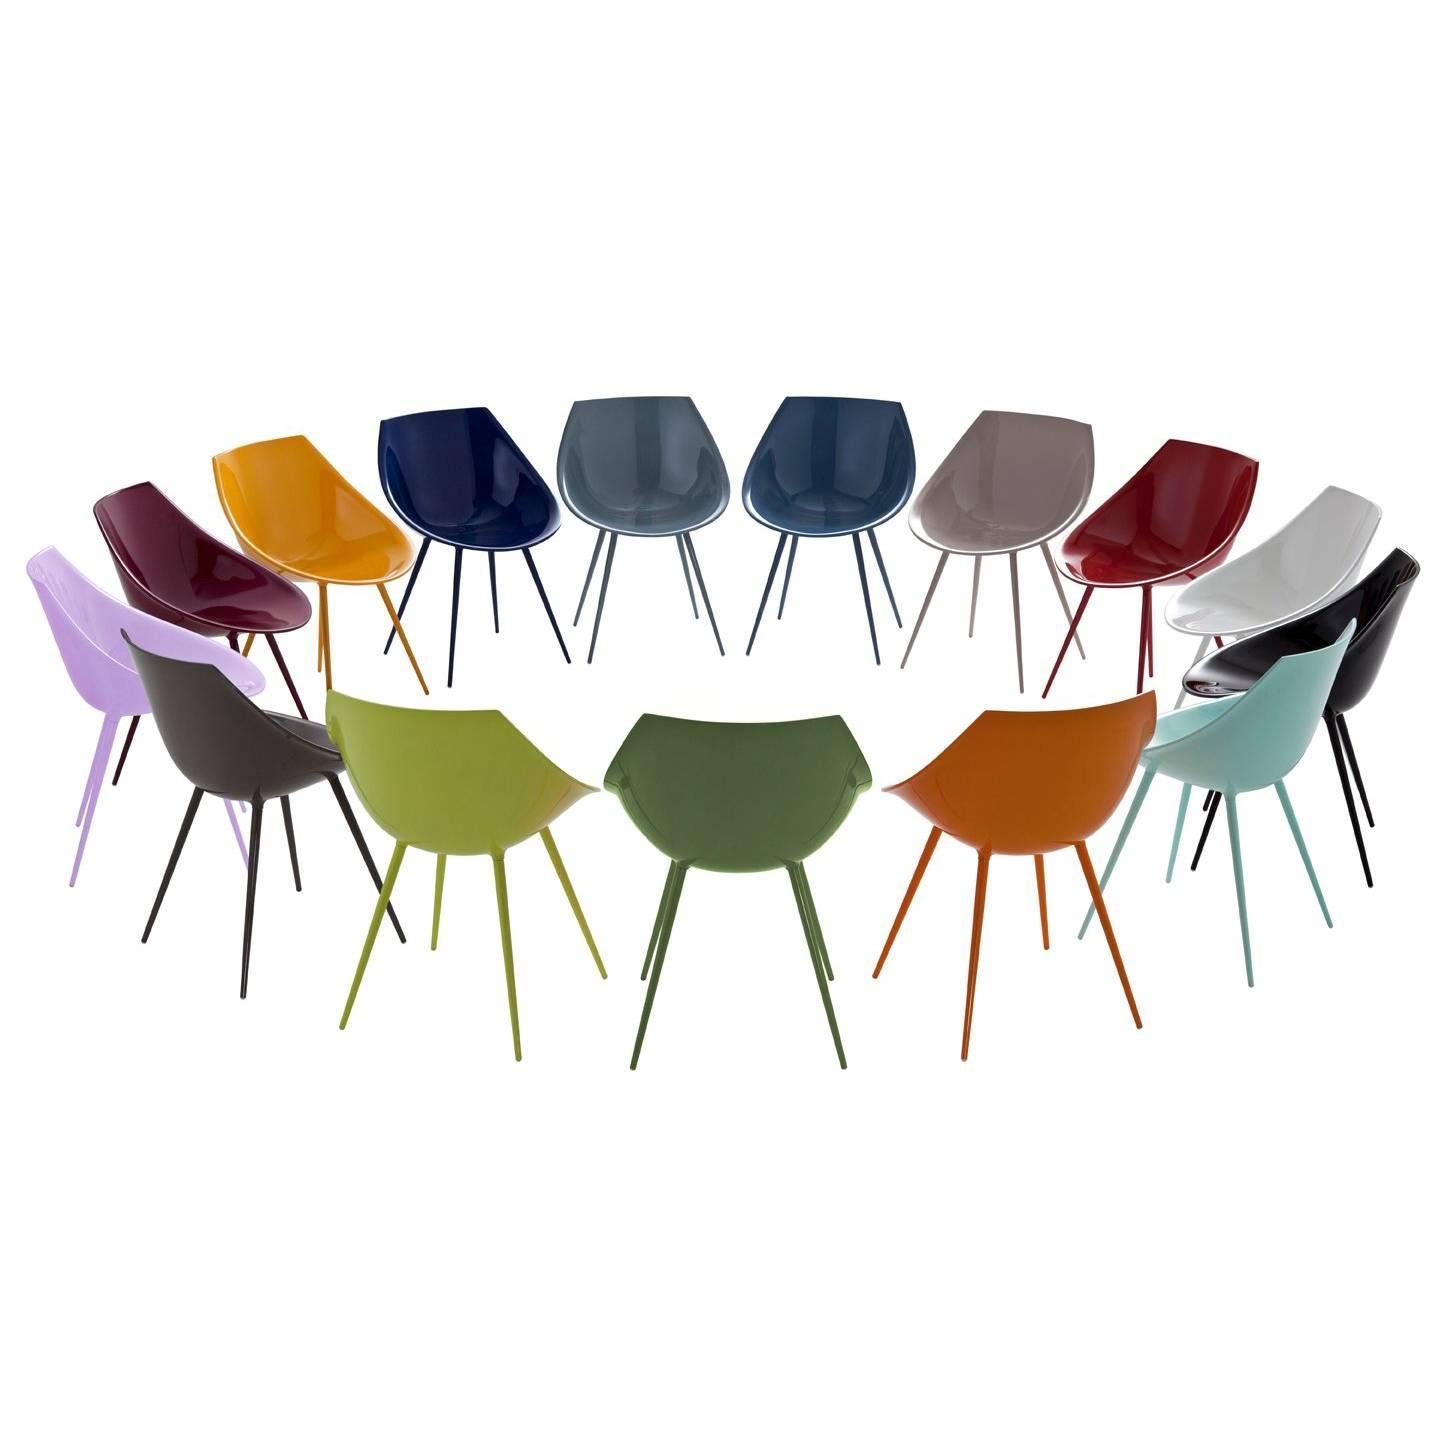 "Lago'" Lacquered Shell and Aluminum Legs Chair by Philippe Starck for Driade